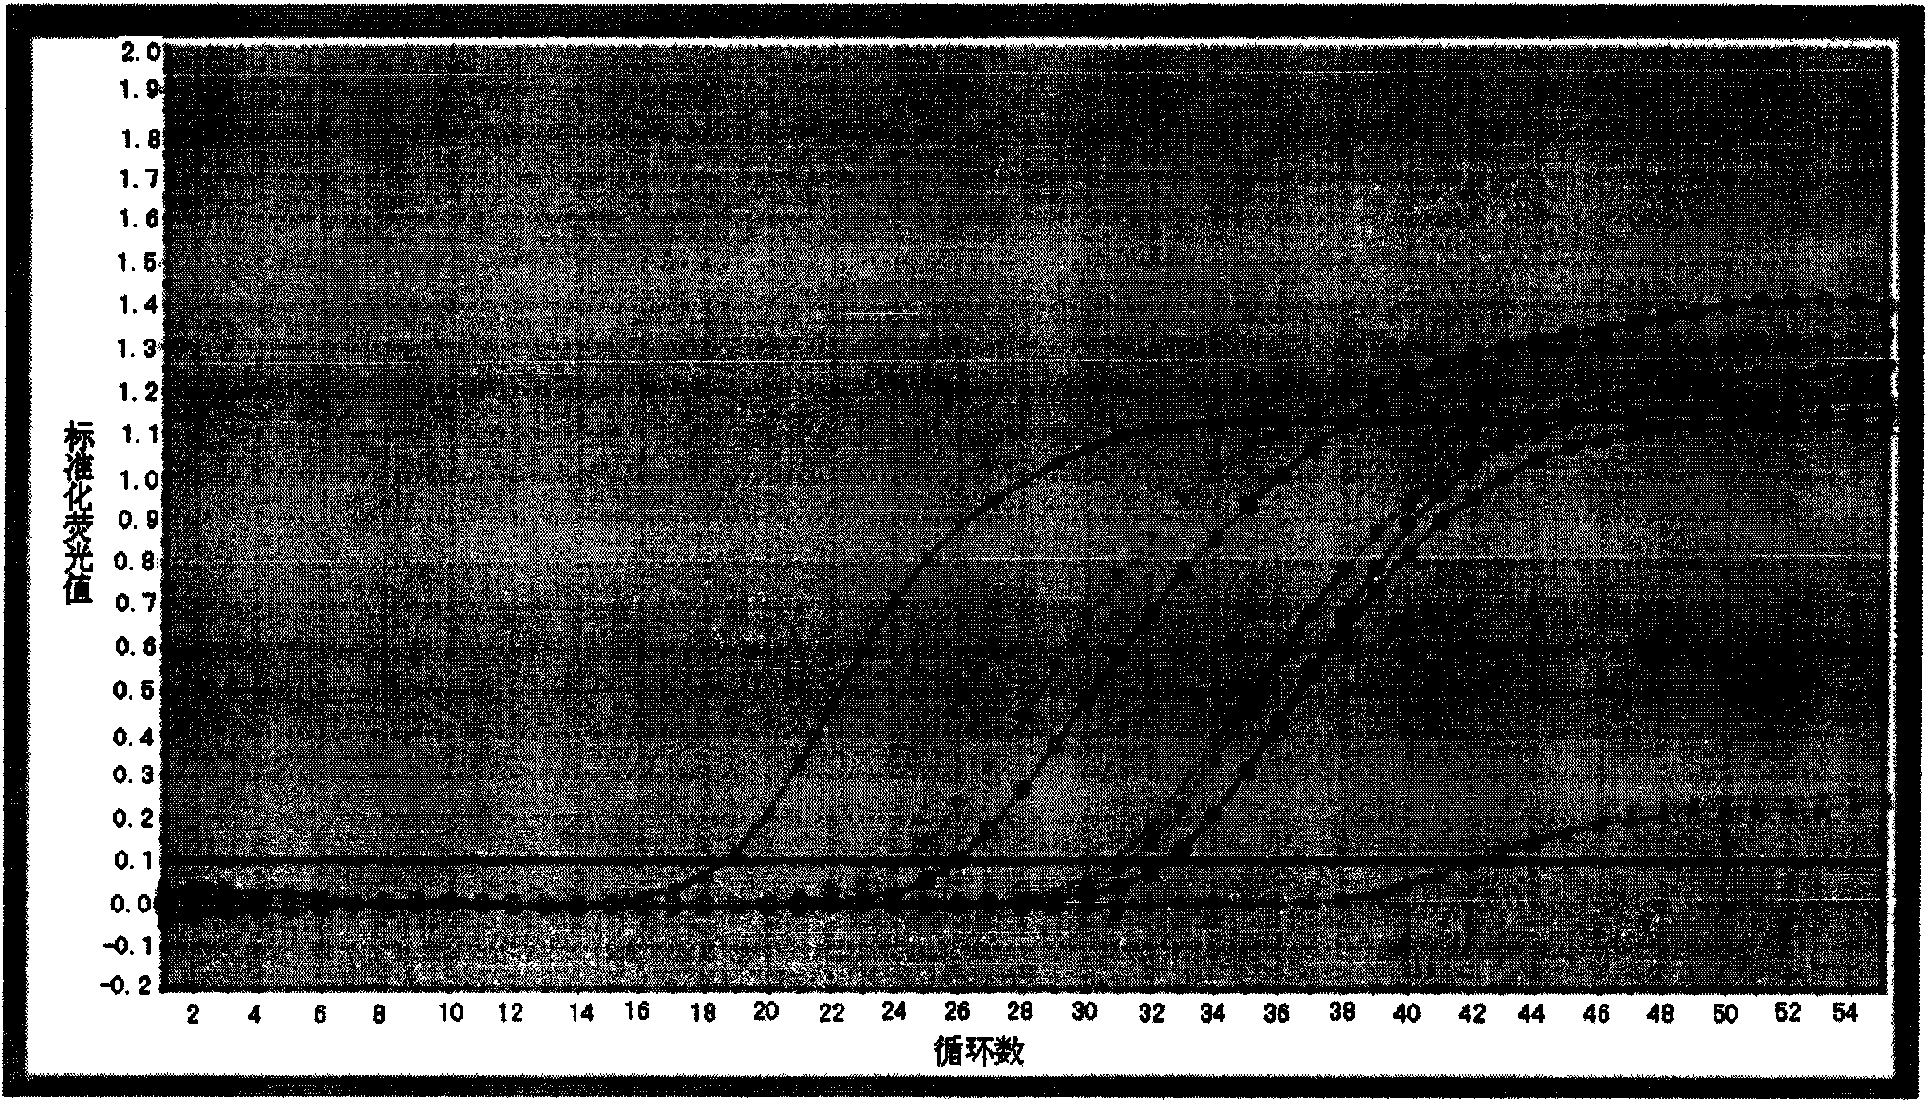 Method of extracting target nucleic acid and performing PCR augmentation